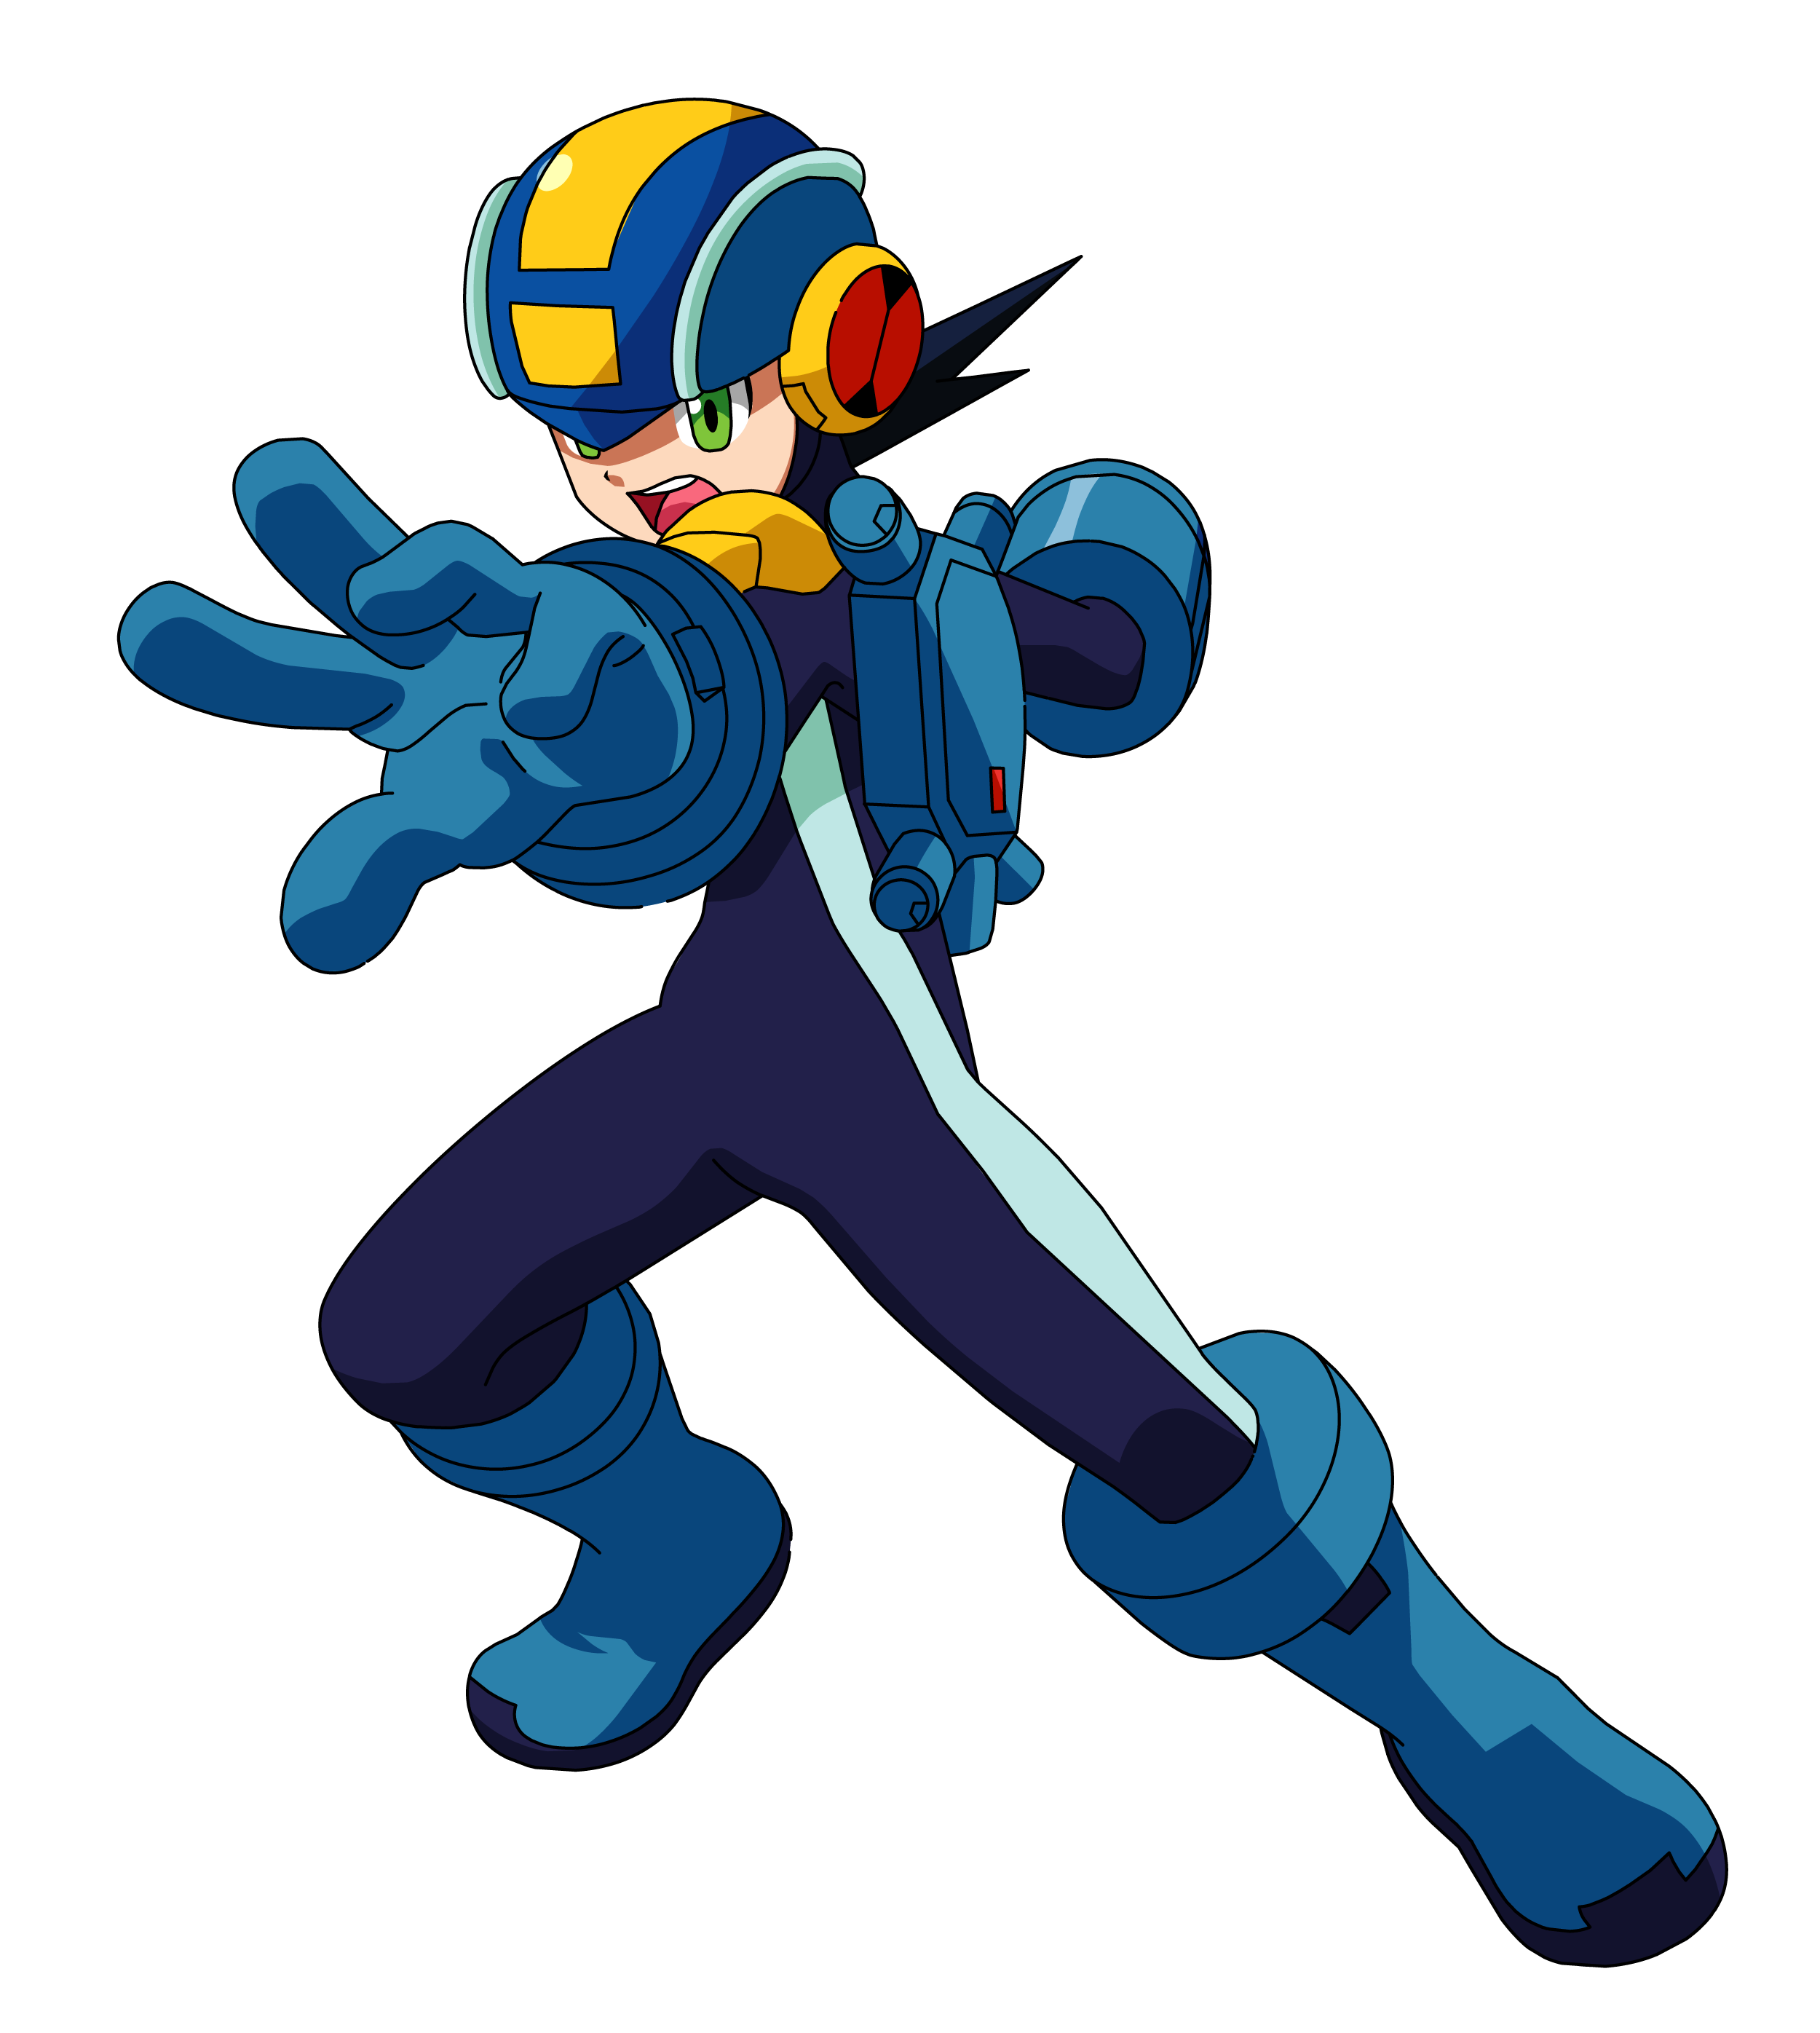 Mega Man Wouldn't Have Been Iconic Without Tokusatsu and Anime